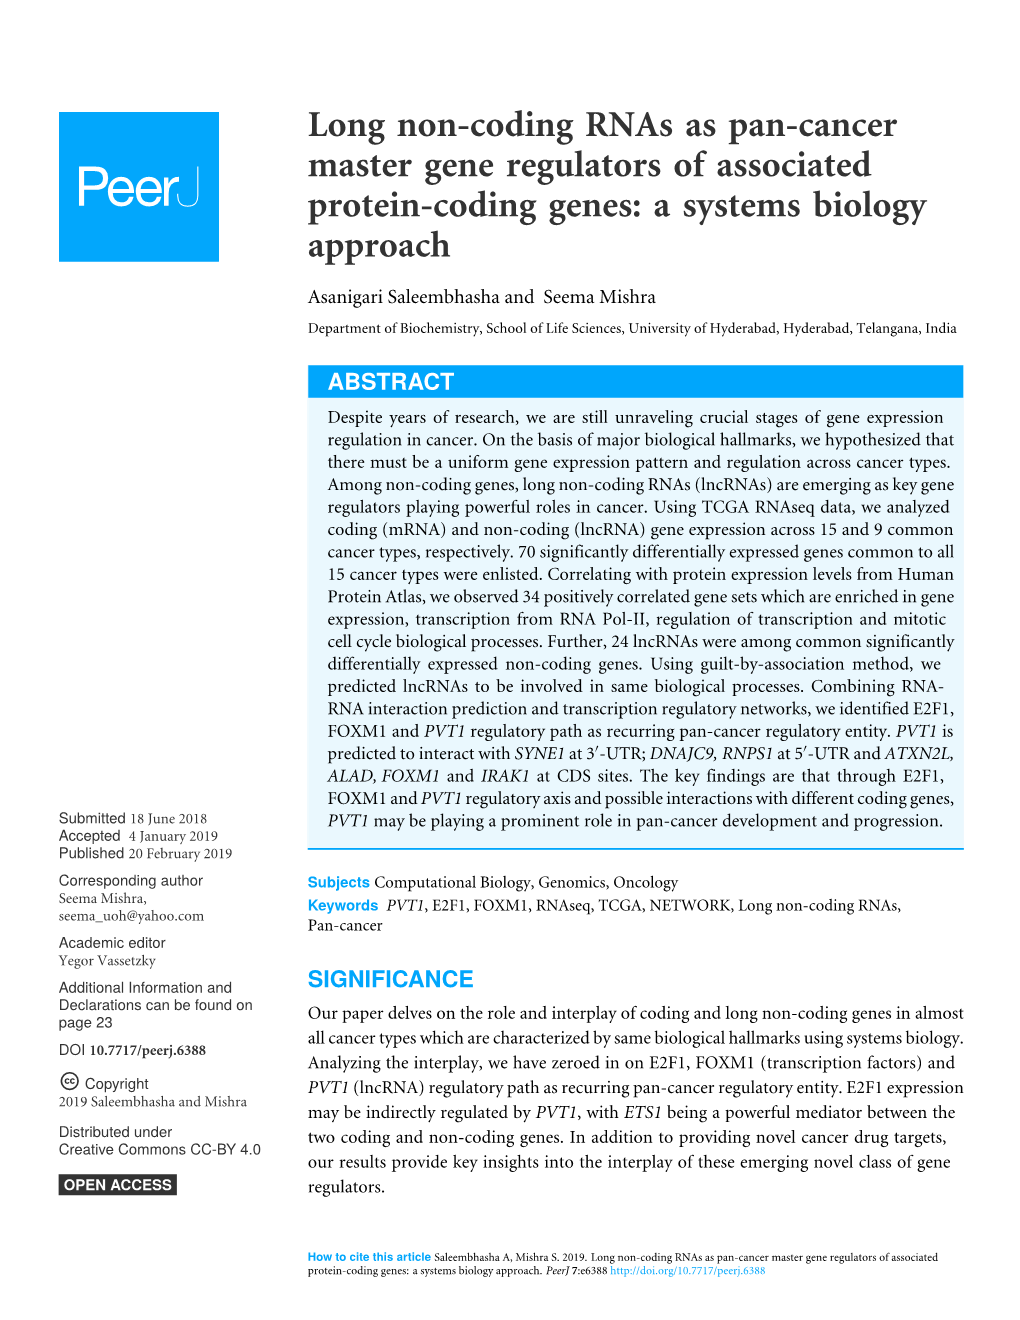 Long Non-Coding Rnas As Pan-Cancer Master Gene Regulators of Associated Protein-Coding Genes: a Systems Biology Approach